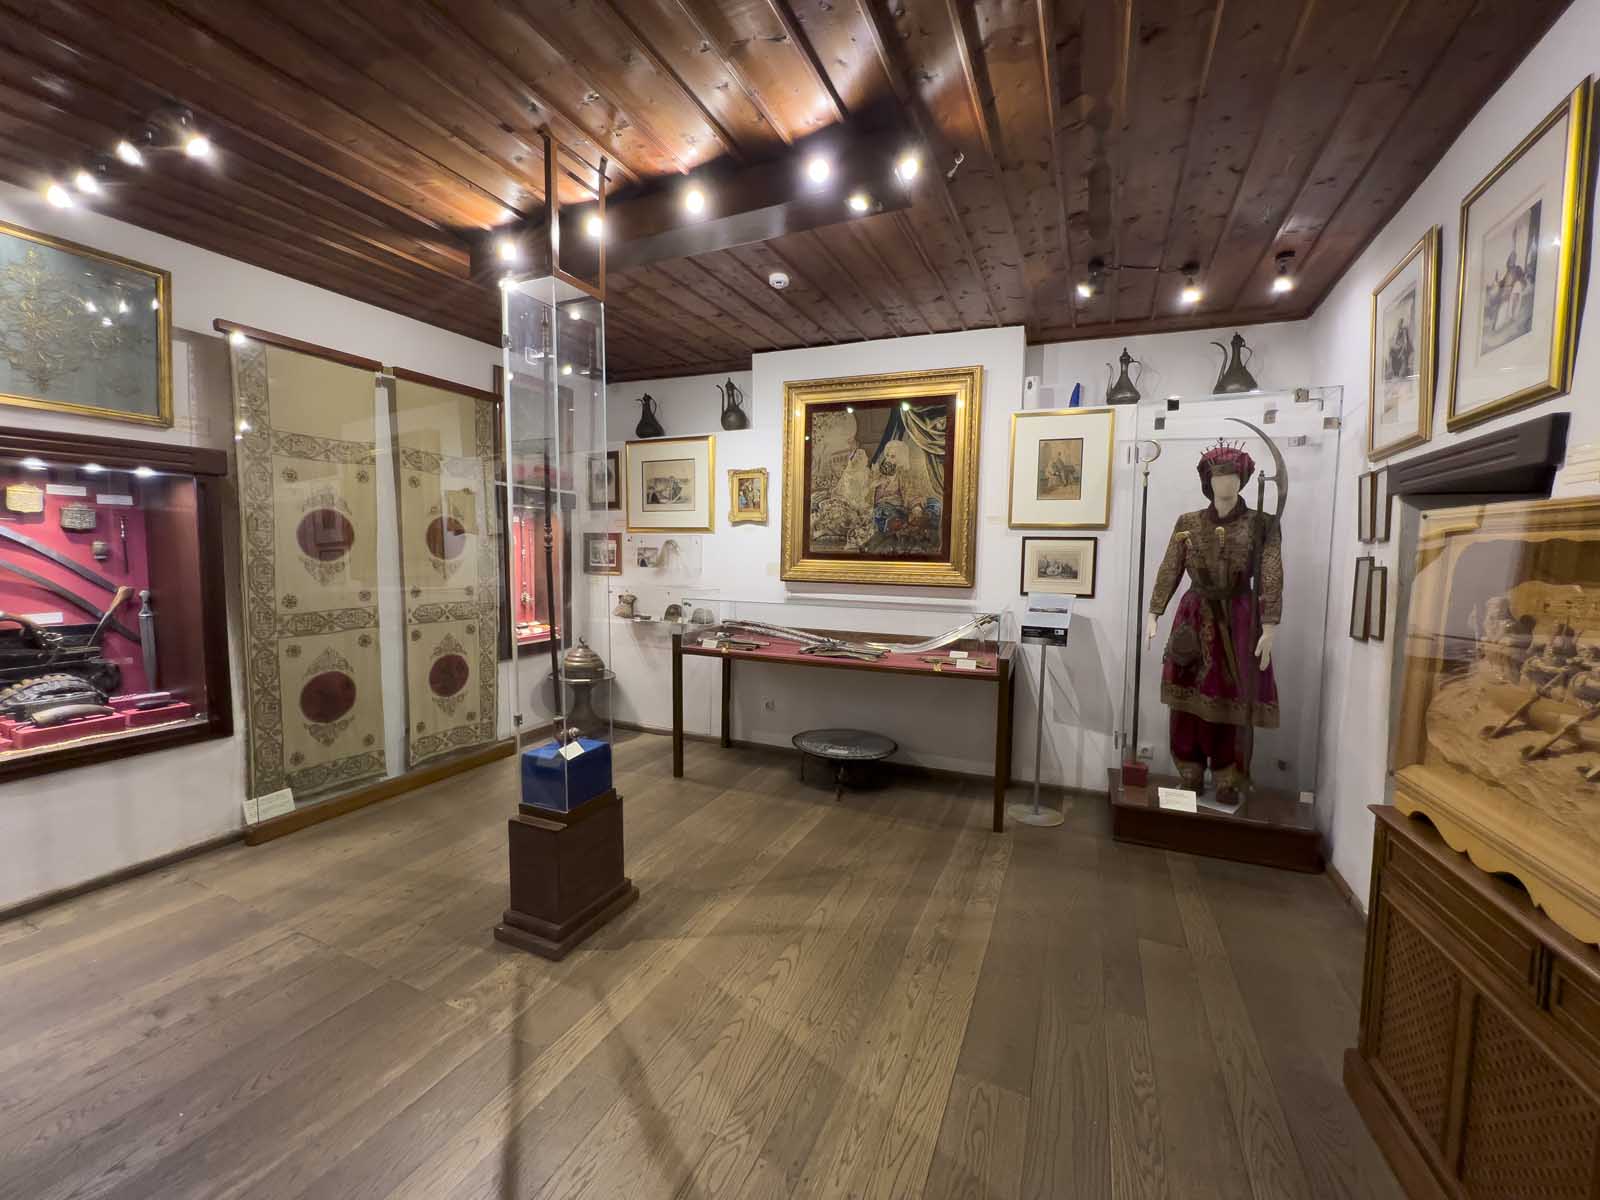 Things to do at the Ioannina Ali Pasha Museum